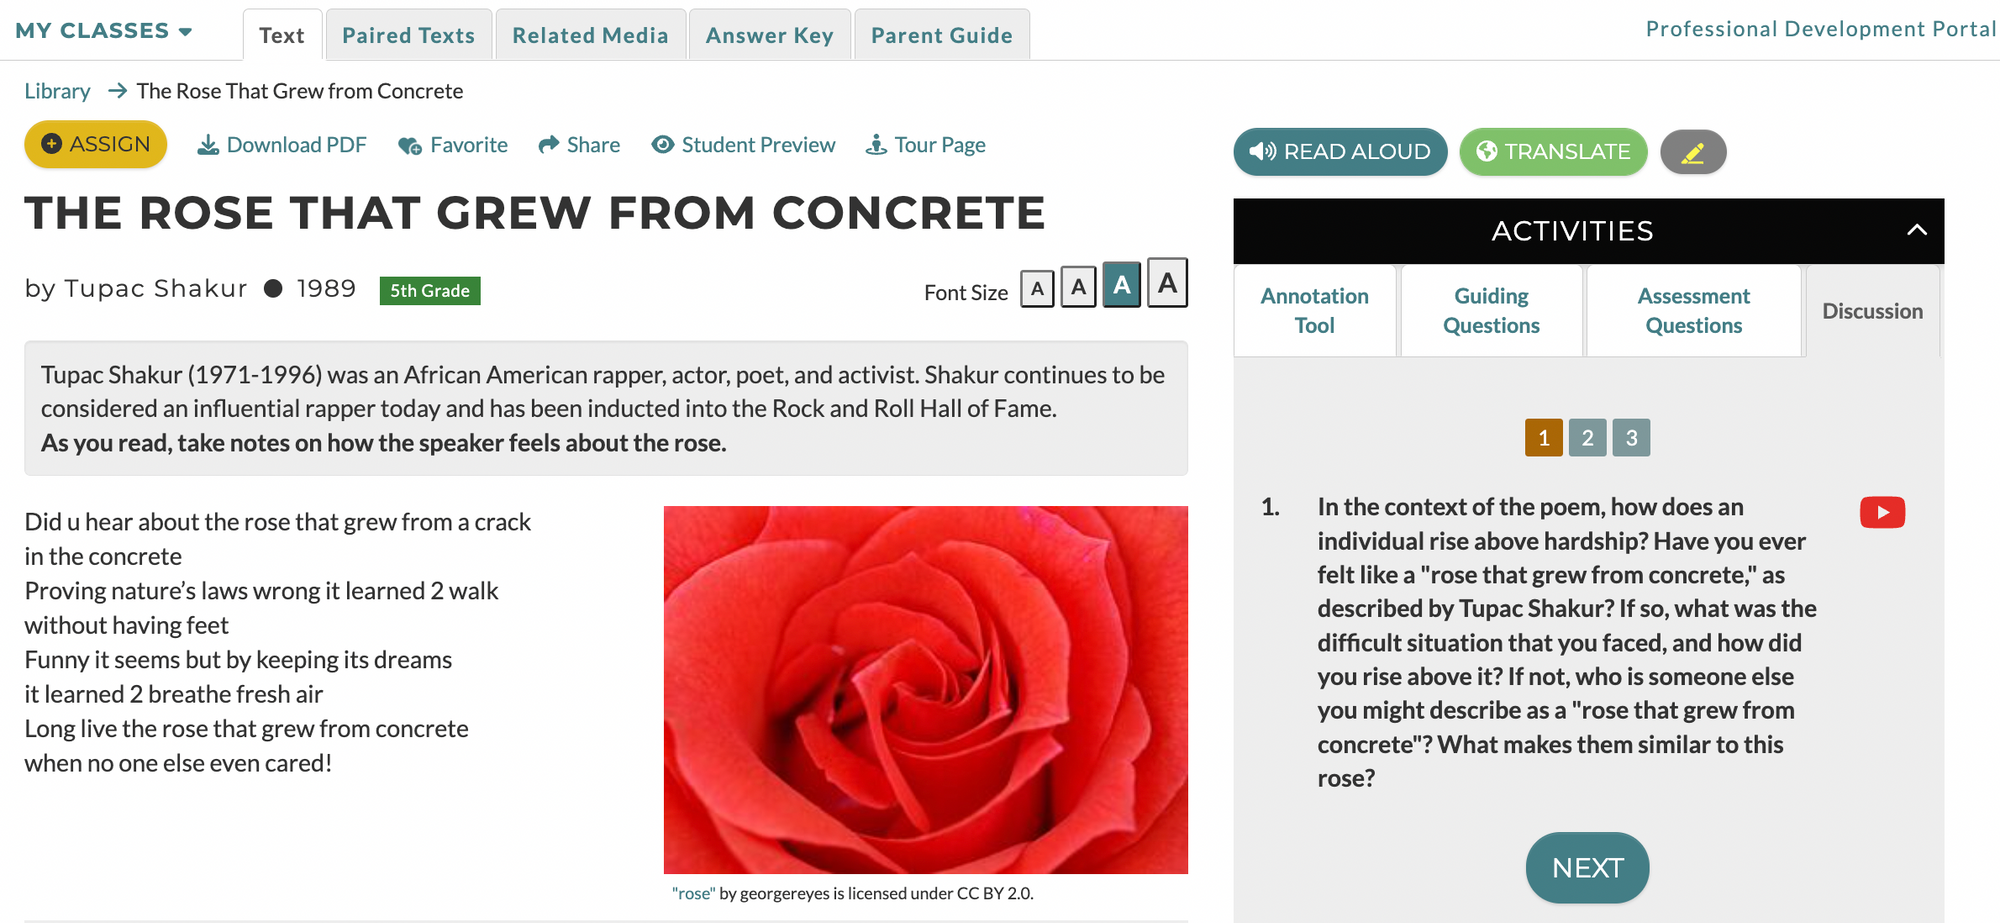 Screenshot of Discussion Question 1 for CommonLit text "The Rose that Grew from Concrete"